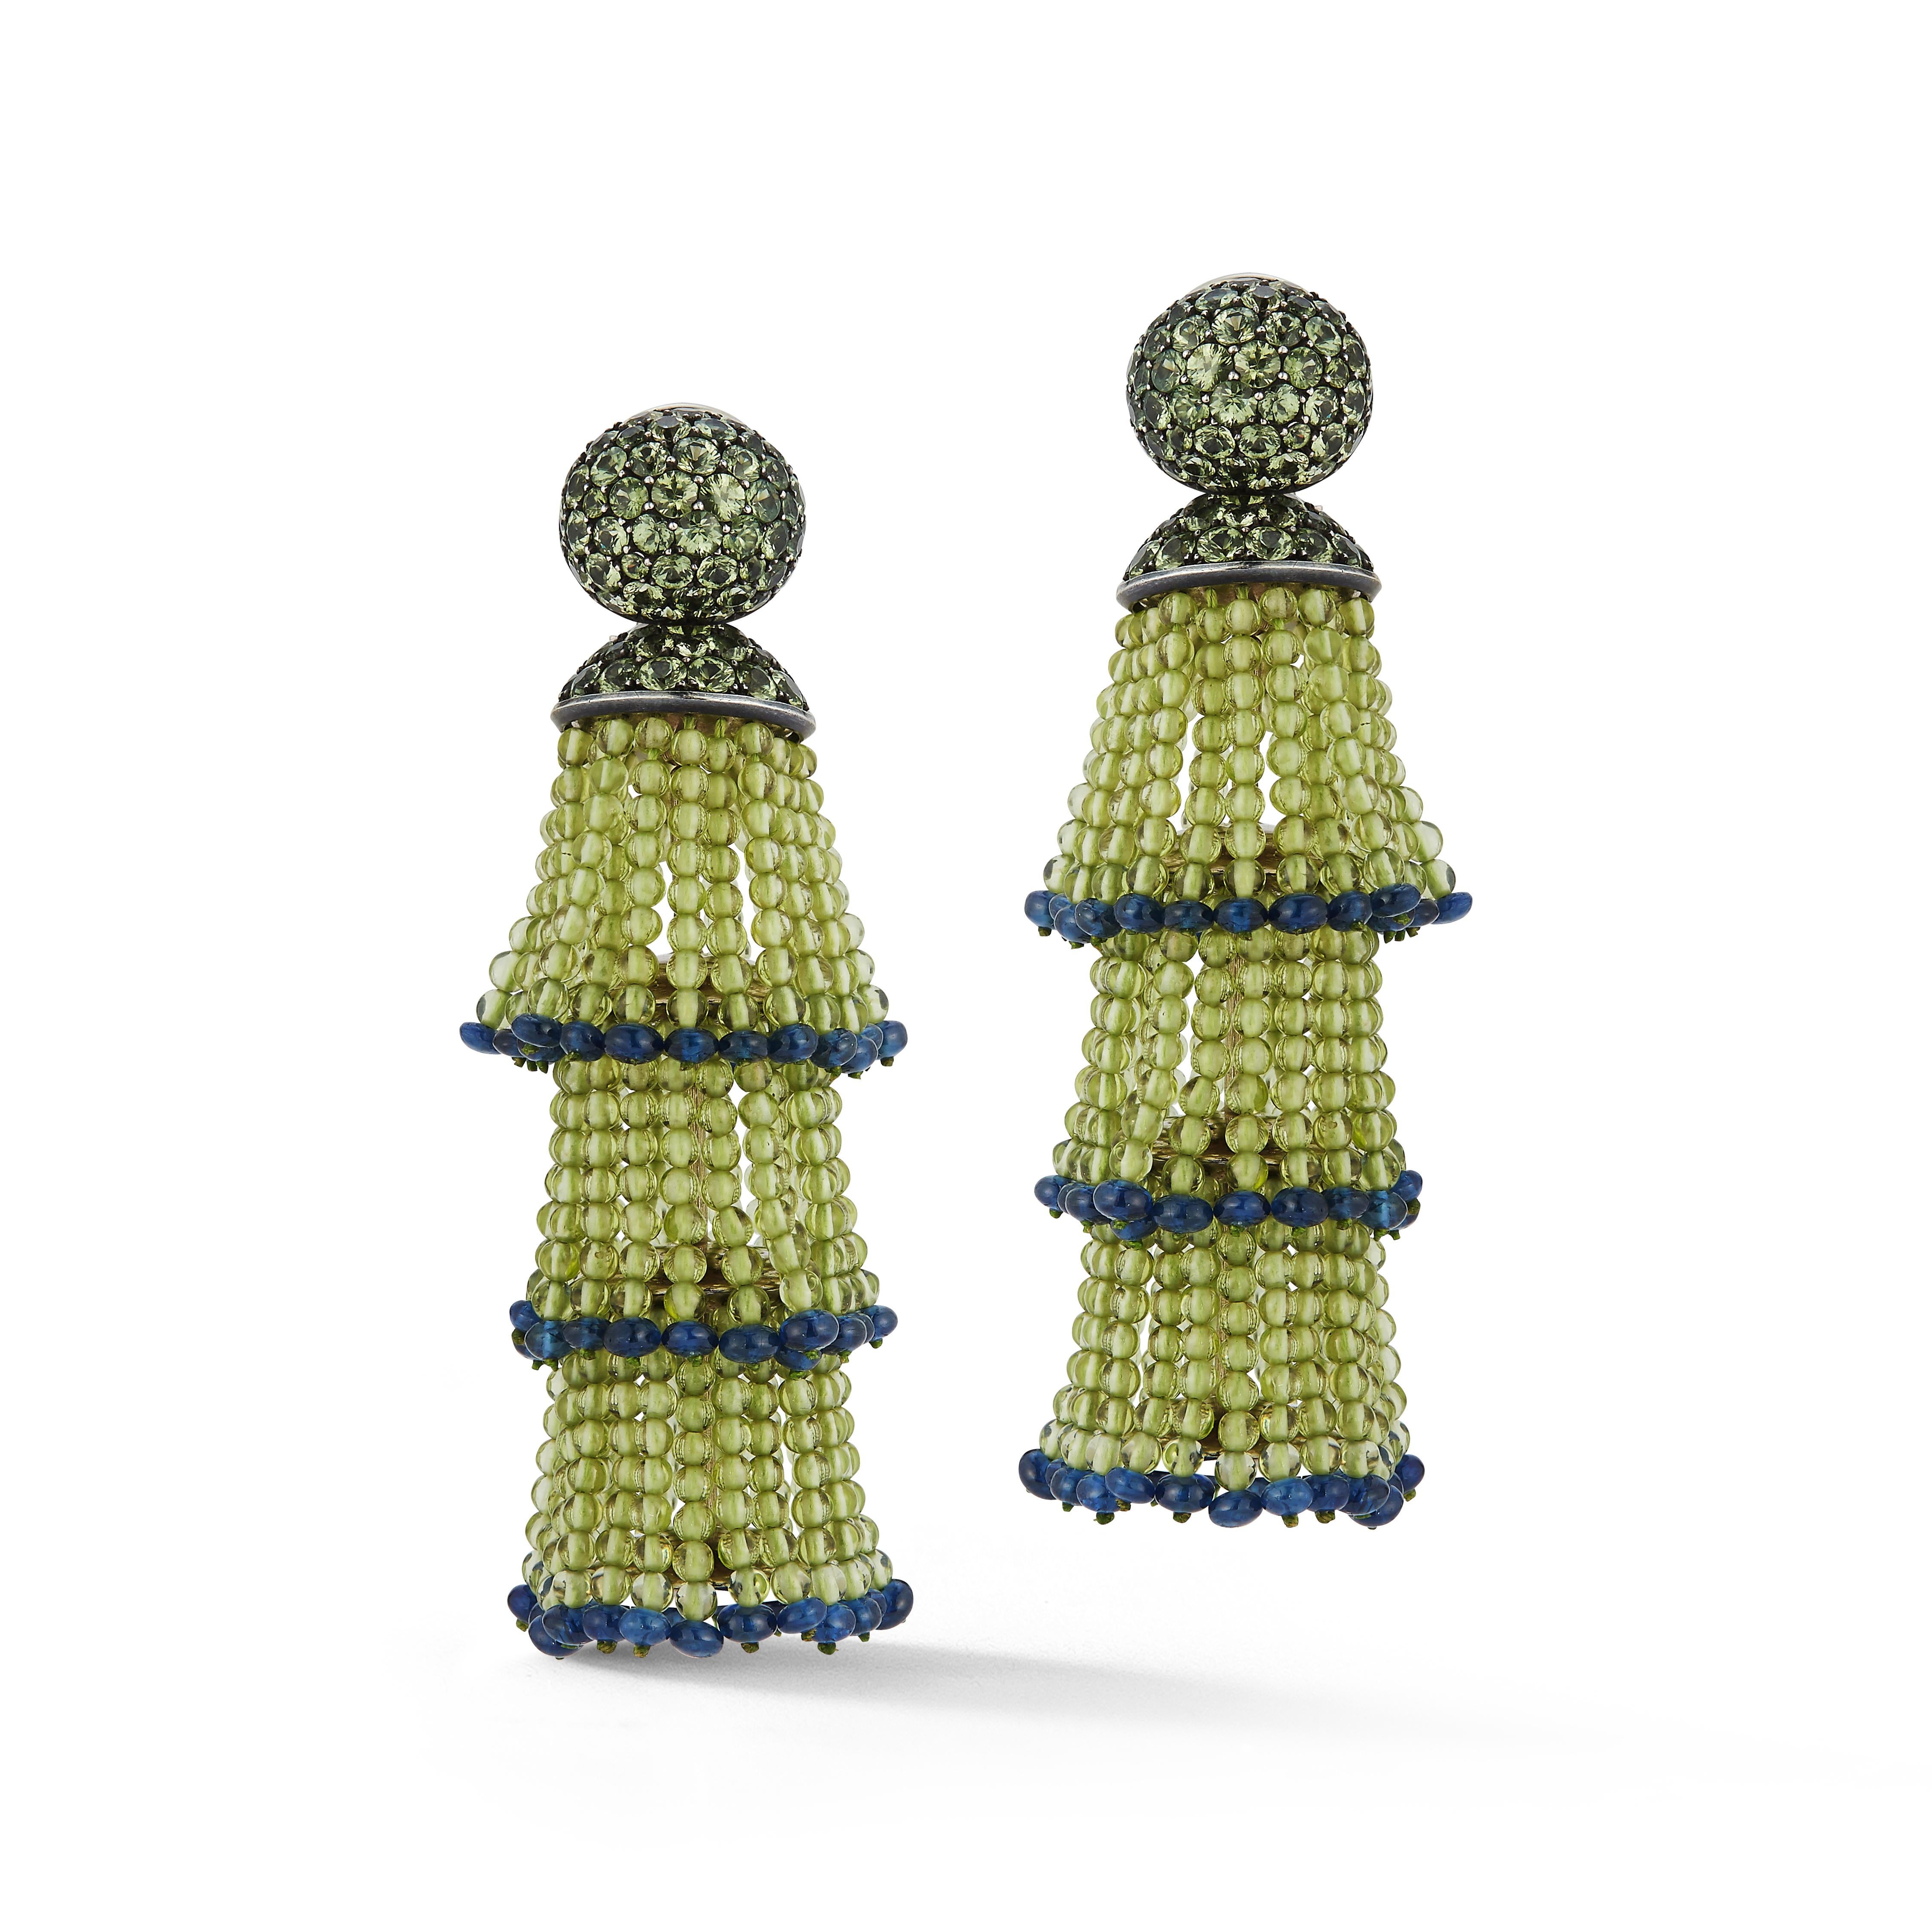 Hemmerle Peridot & Sapphire Tassel Earrings 

This iconic design features peridot beads set with blue and green sapphires

Signed Hemmerle 

With original box

Length: approximately 2.32 inches

